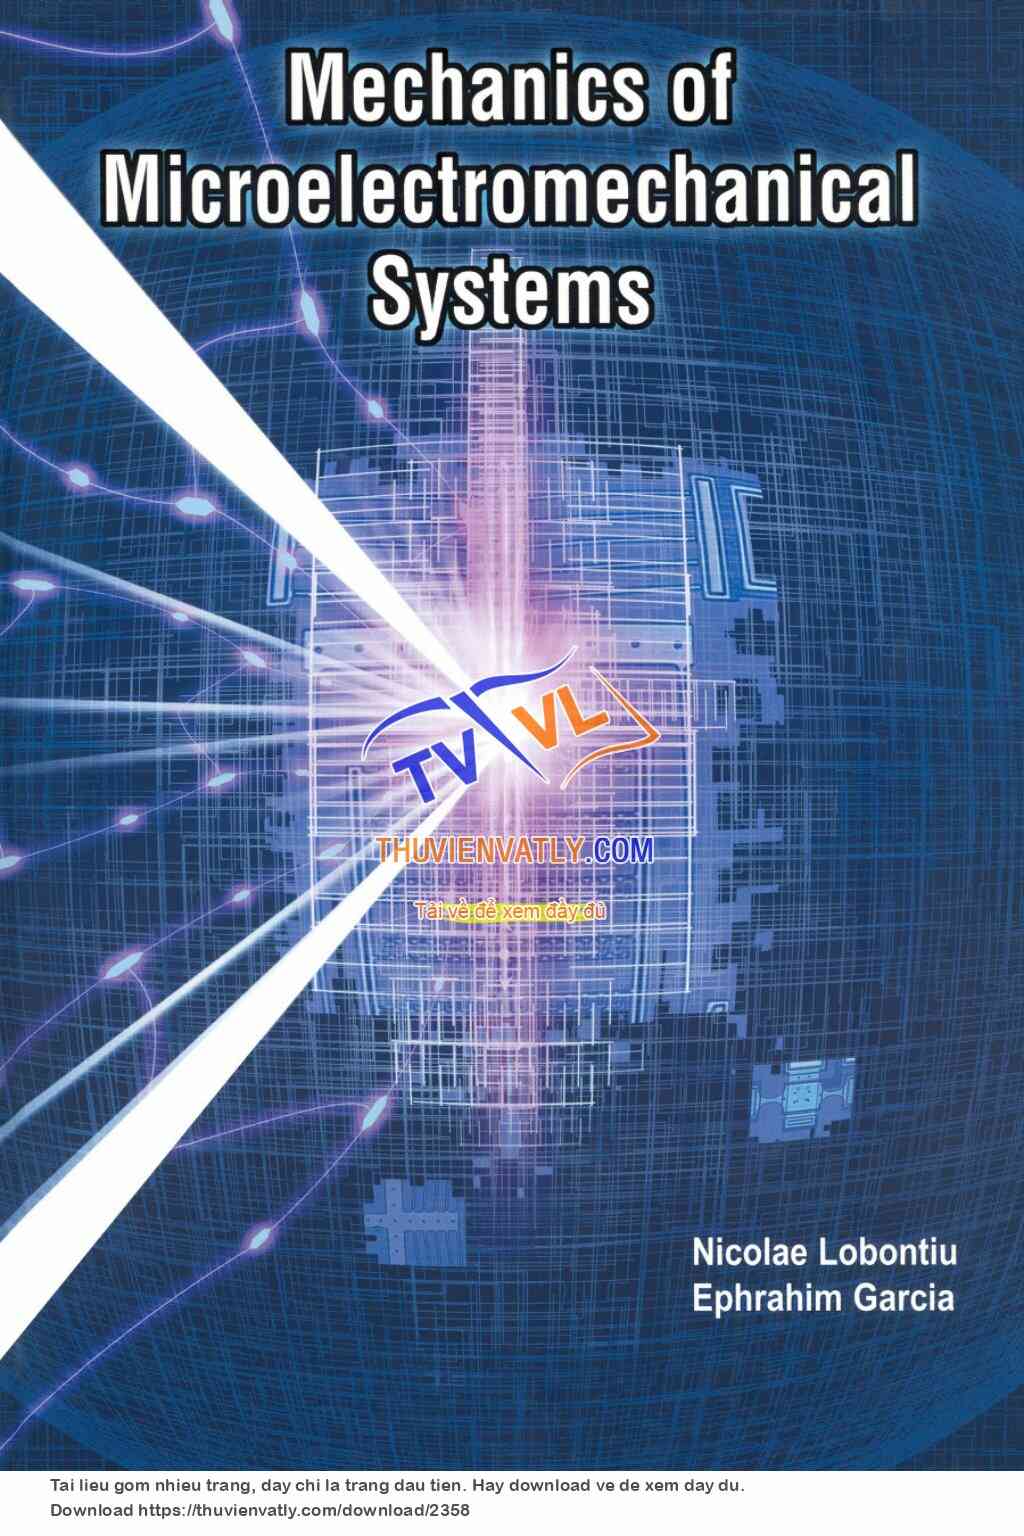 Mechanics of Microelectronmachenical Systems